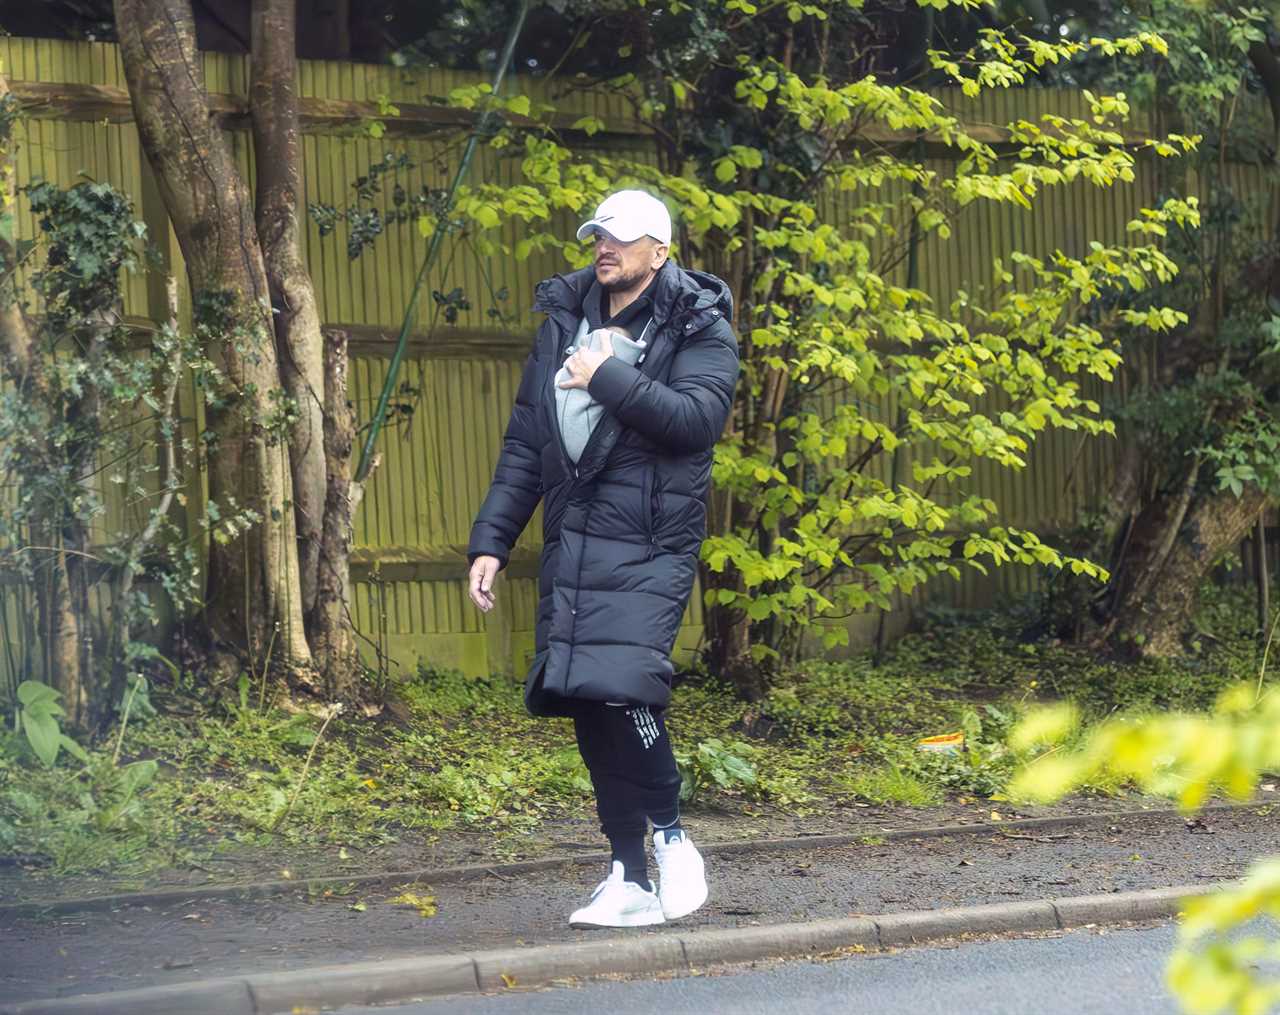 Peter Andre Takes Newborn Daughter for a Walk After Revealing Her Name